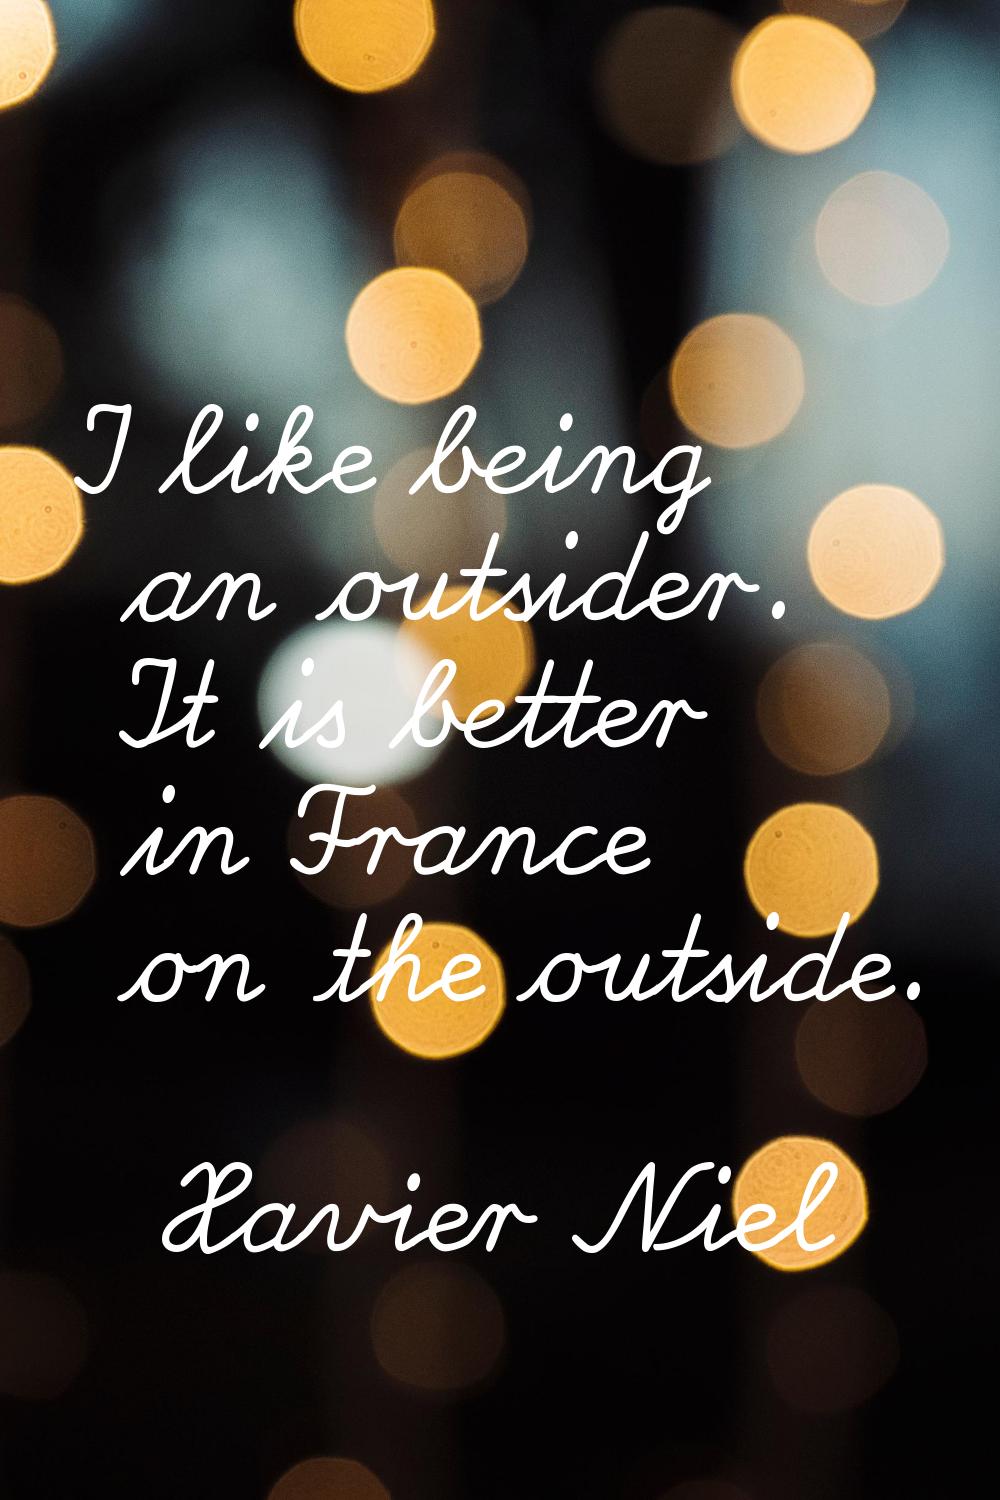 I like being an outsider. It is better in France on the outside.